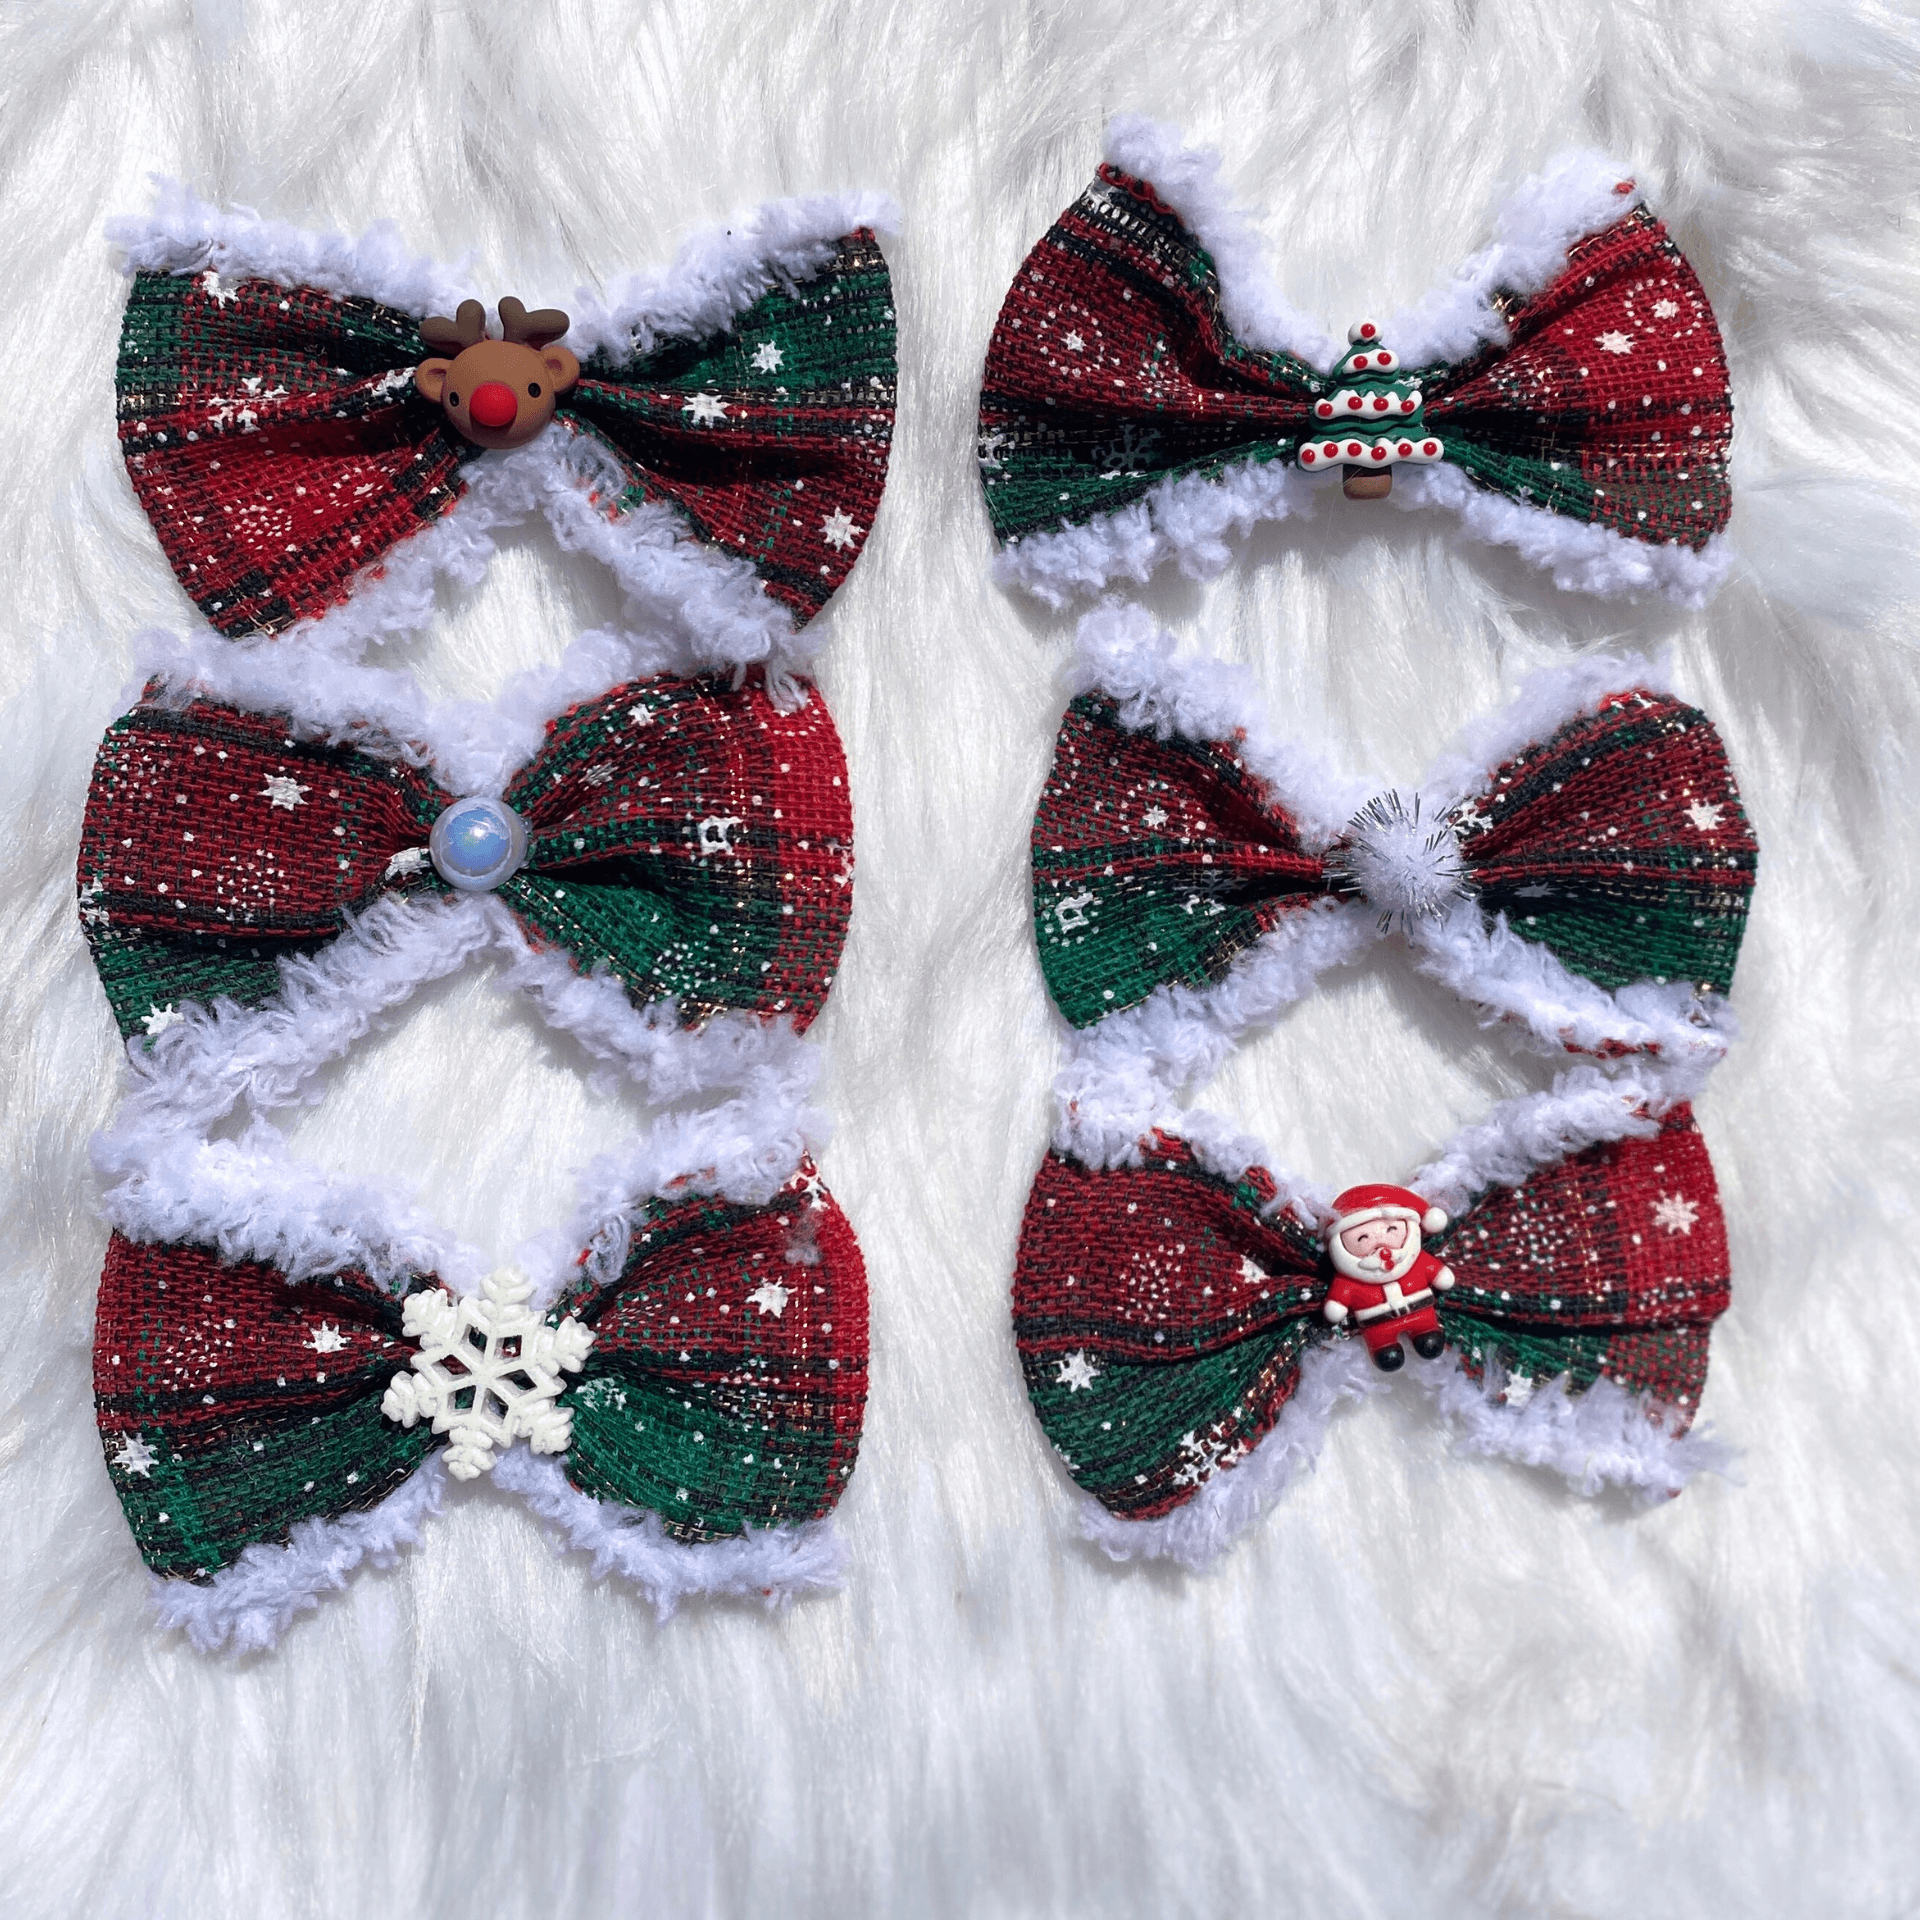 Dog bow over the collar accessory red and green plaid, let's pawty 